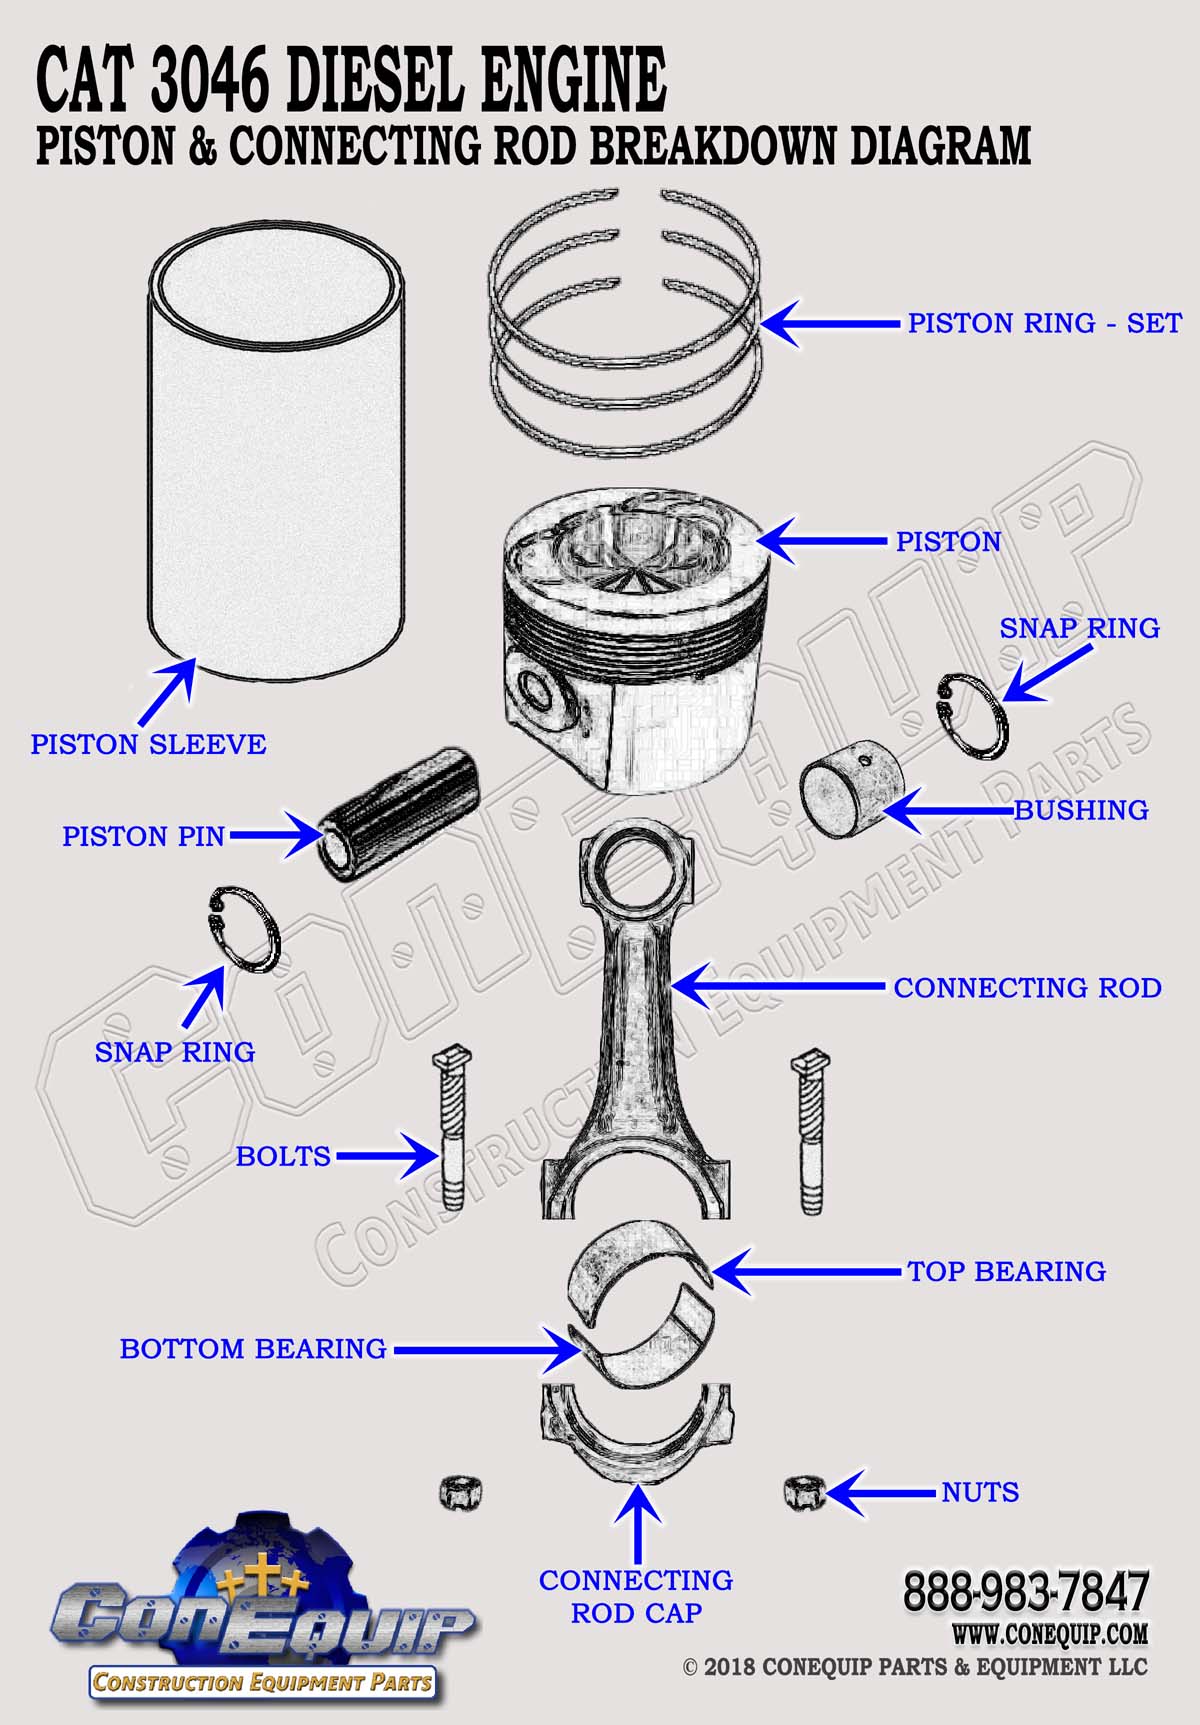 CAT 3046 piston connecting rod assembly